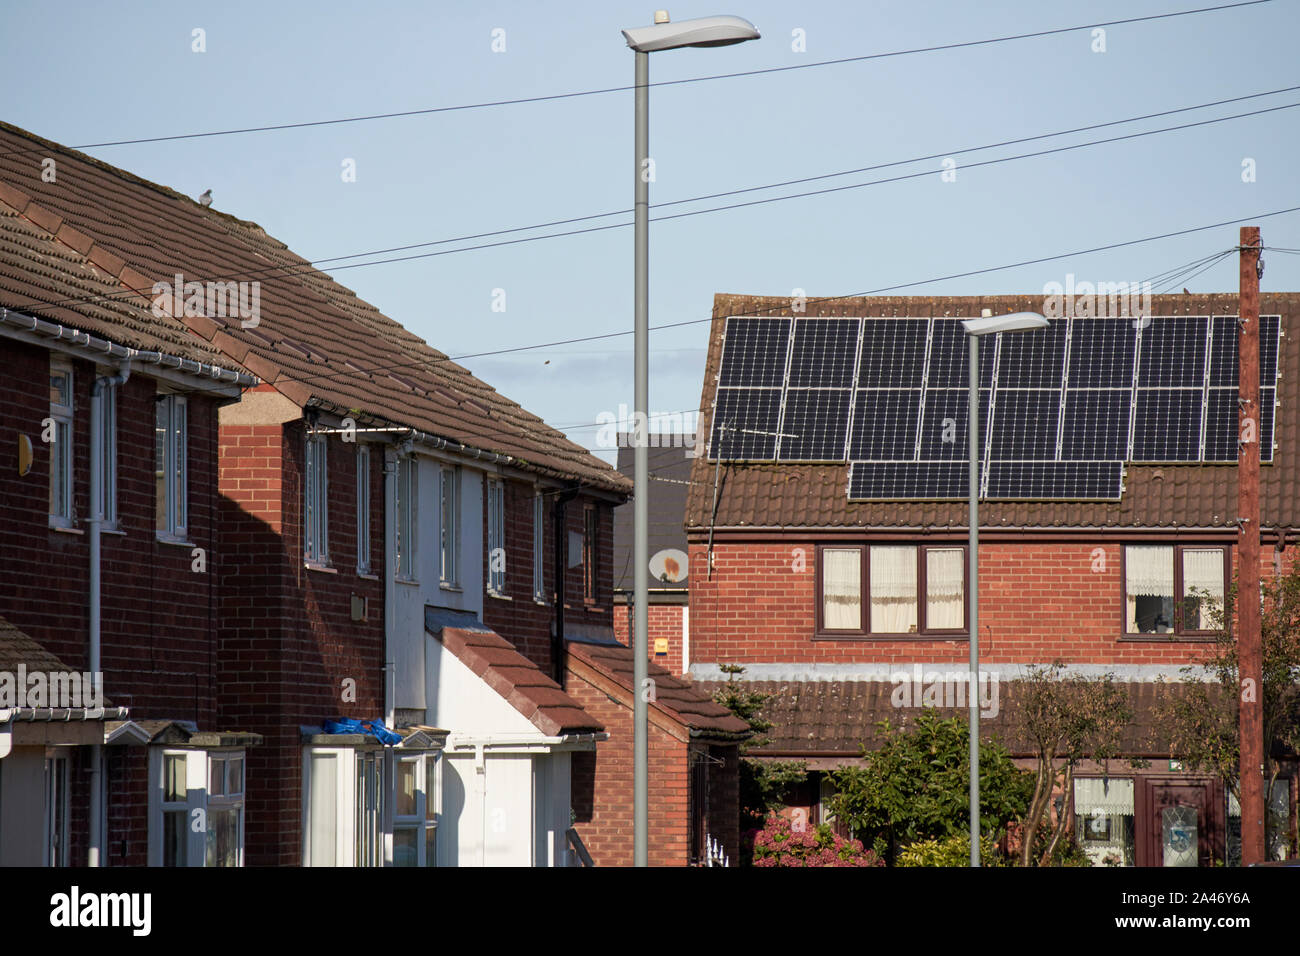 solar panels on a south facing roof of a house in a street in Liverpool England UK Stock Photo